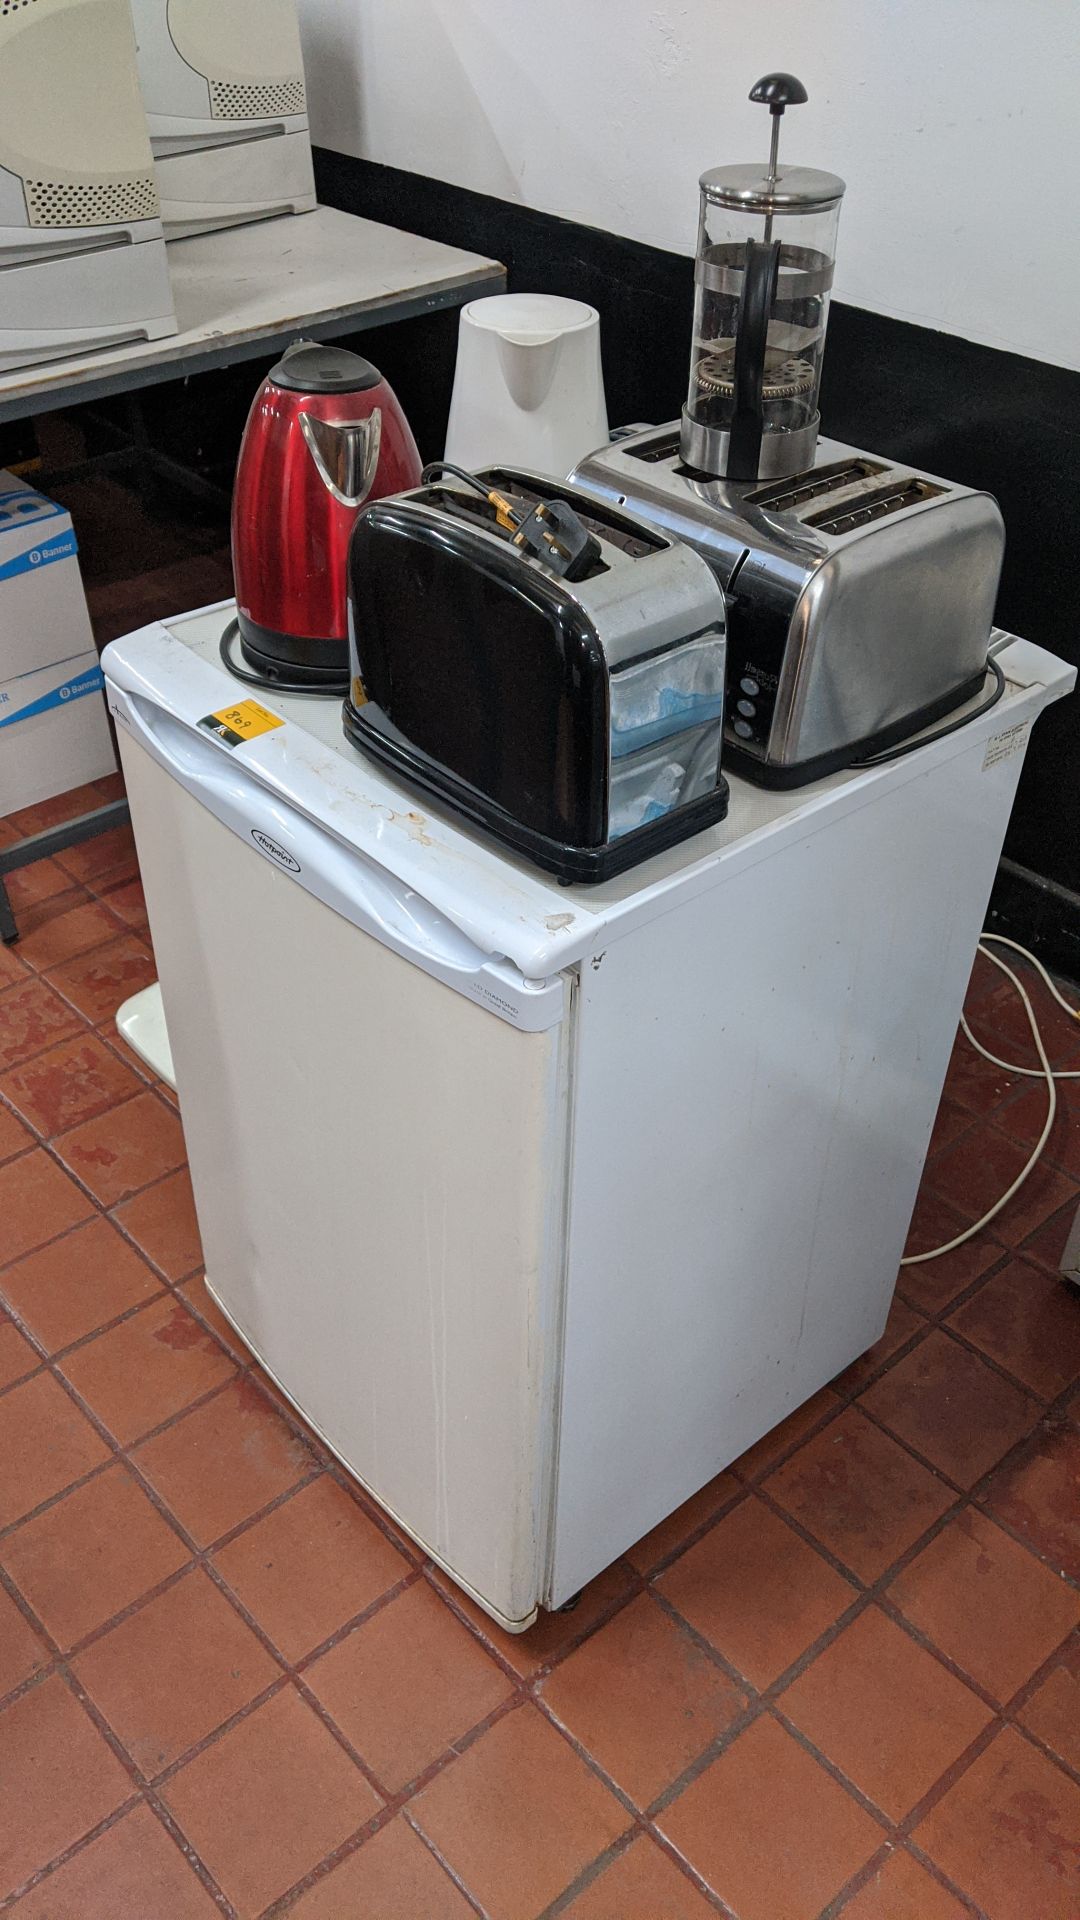 Domestic appliance lot comprising Hotpoint counter height fridge plus 2 off toasters, 1 off